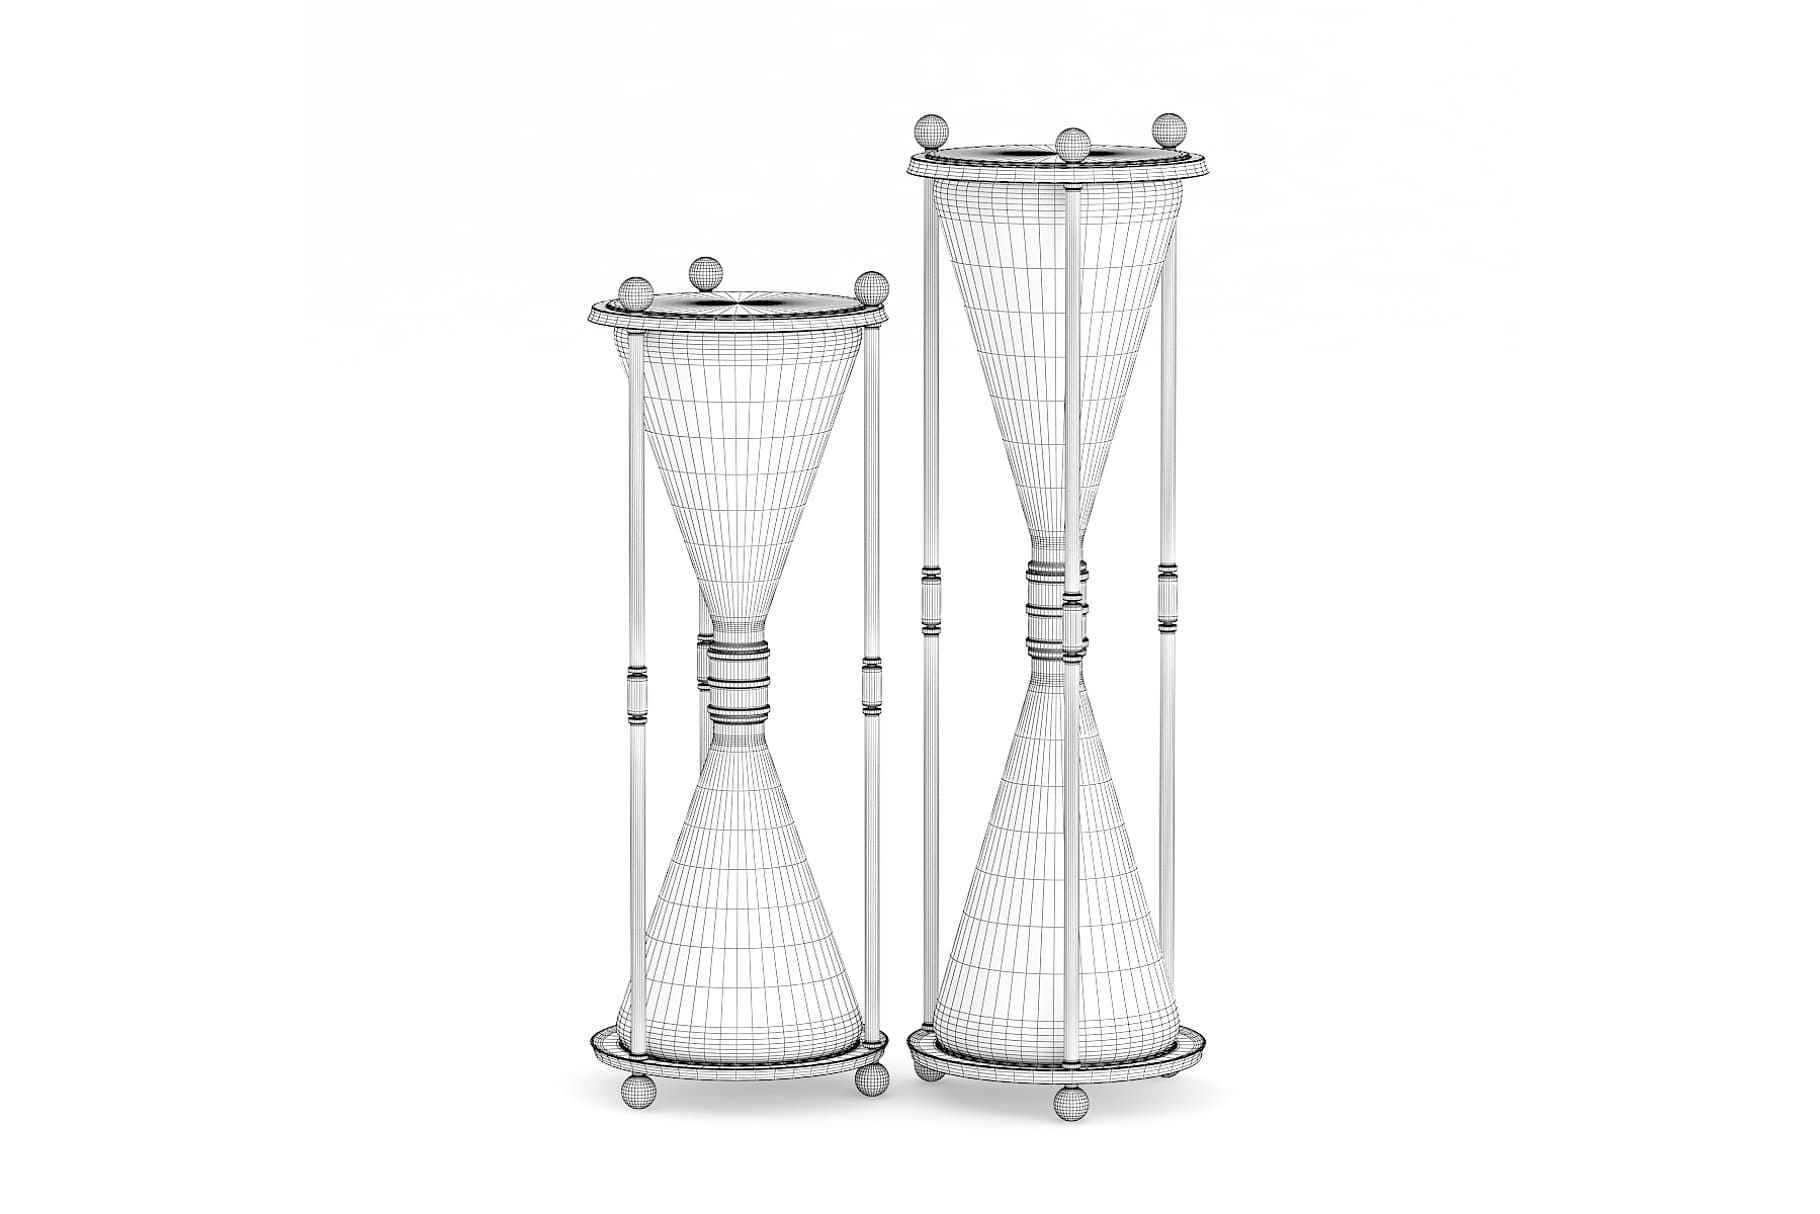 3D model of an hourglass between three thin supports.